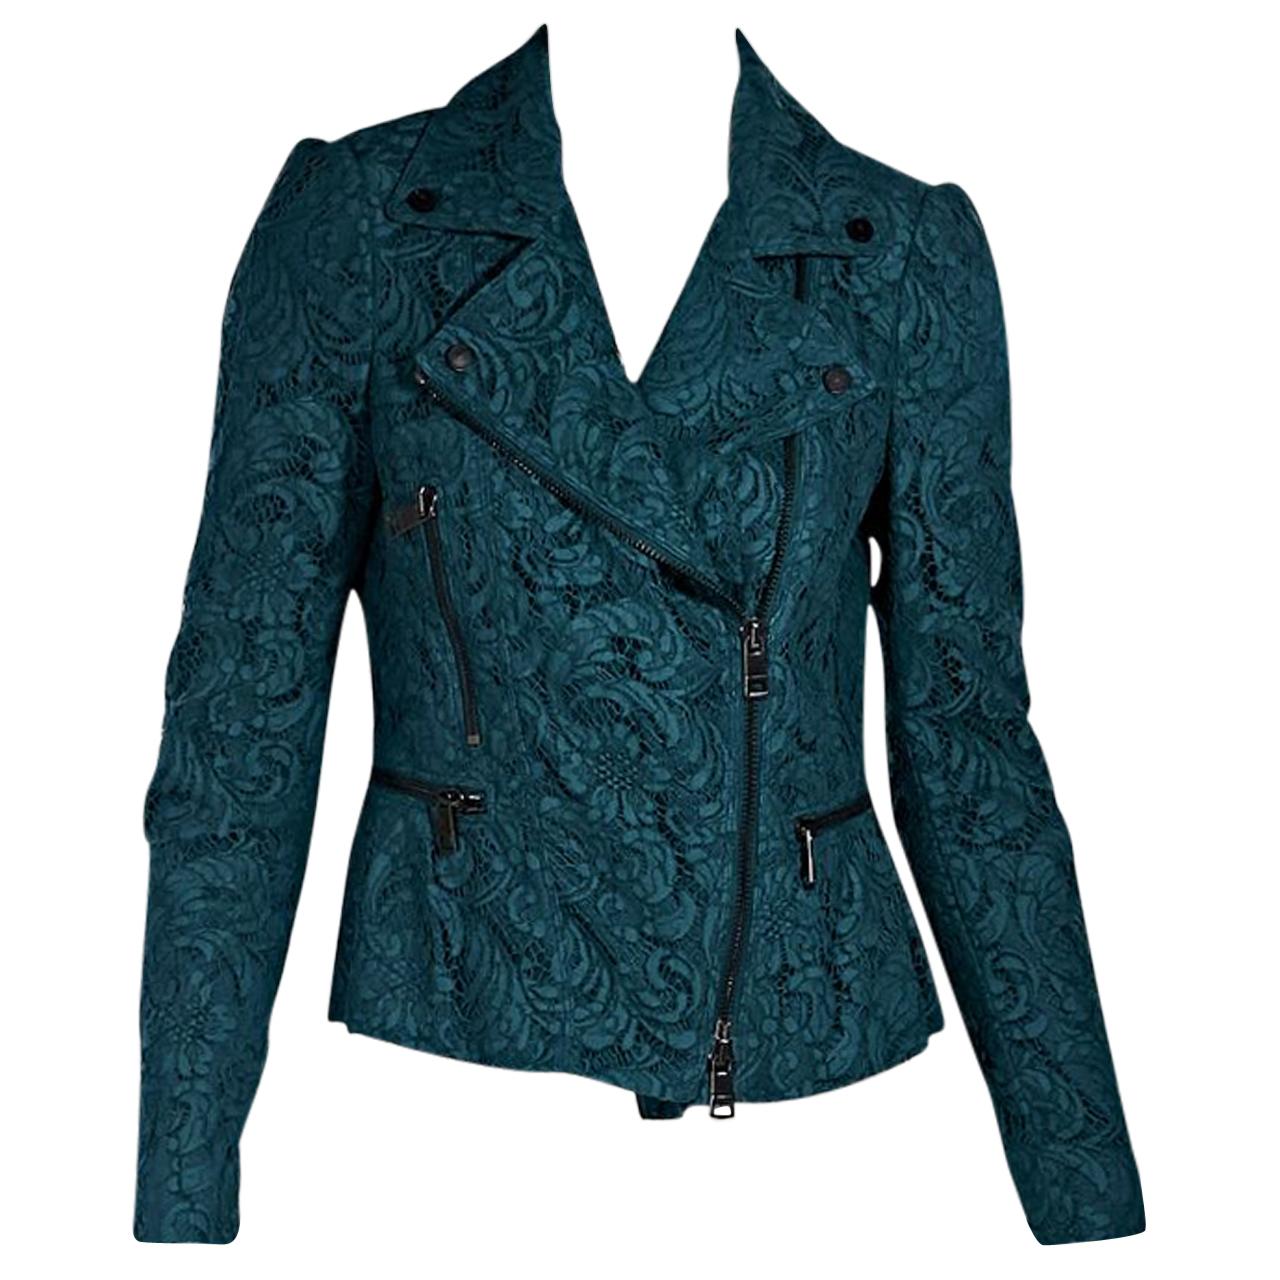 Teal Burberry London Lace Moto Jacket